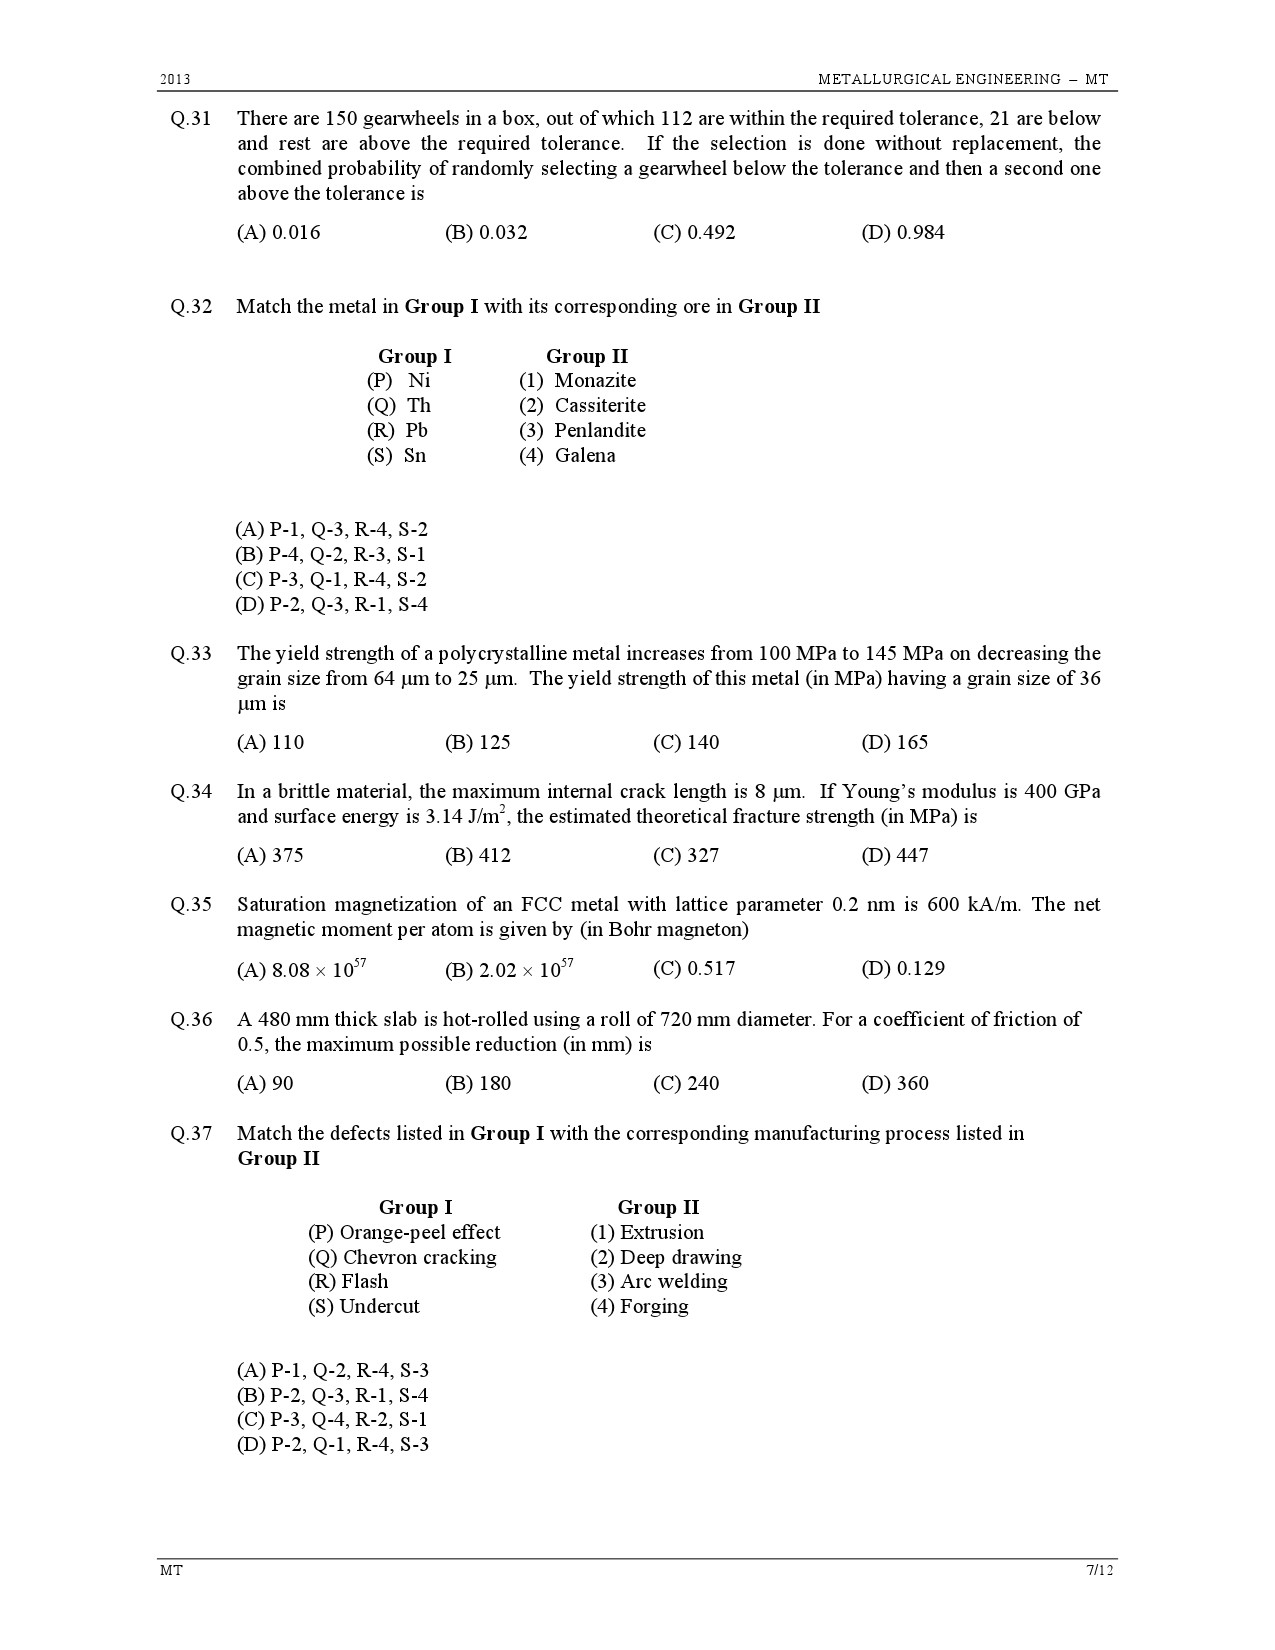 GATE Exam Question Paper 2013 Metallurgical Engineering 7